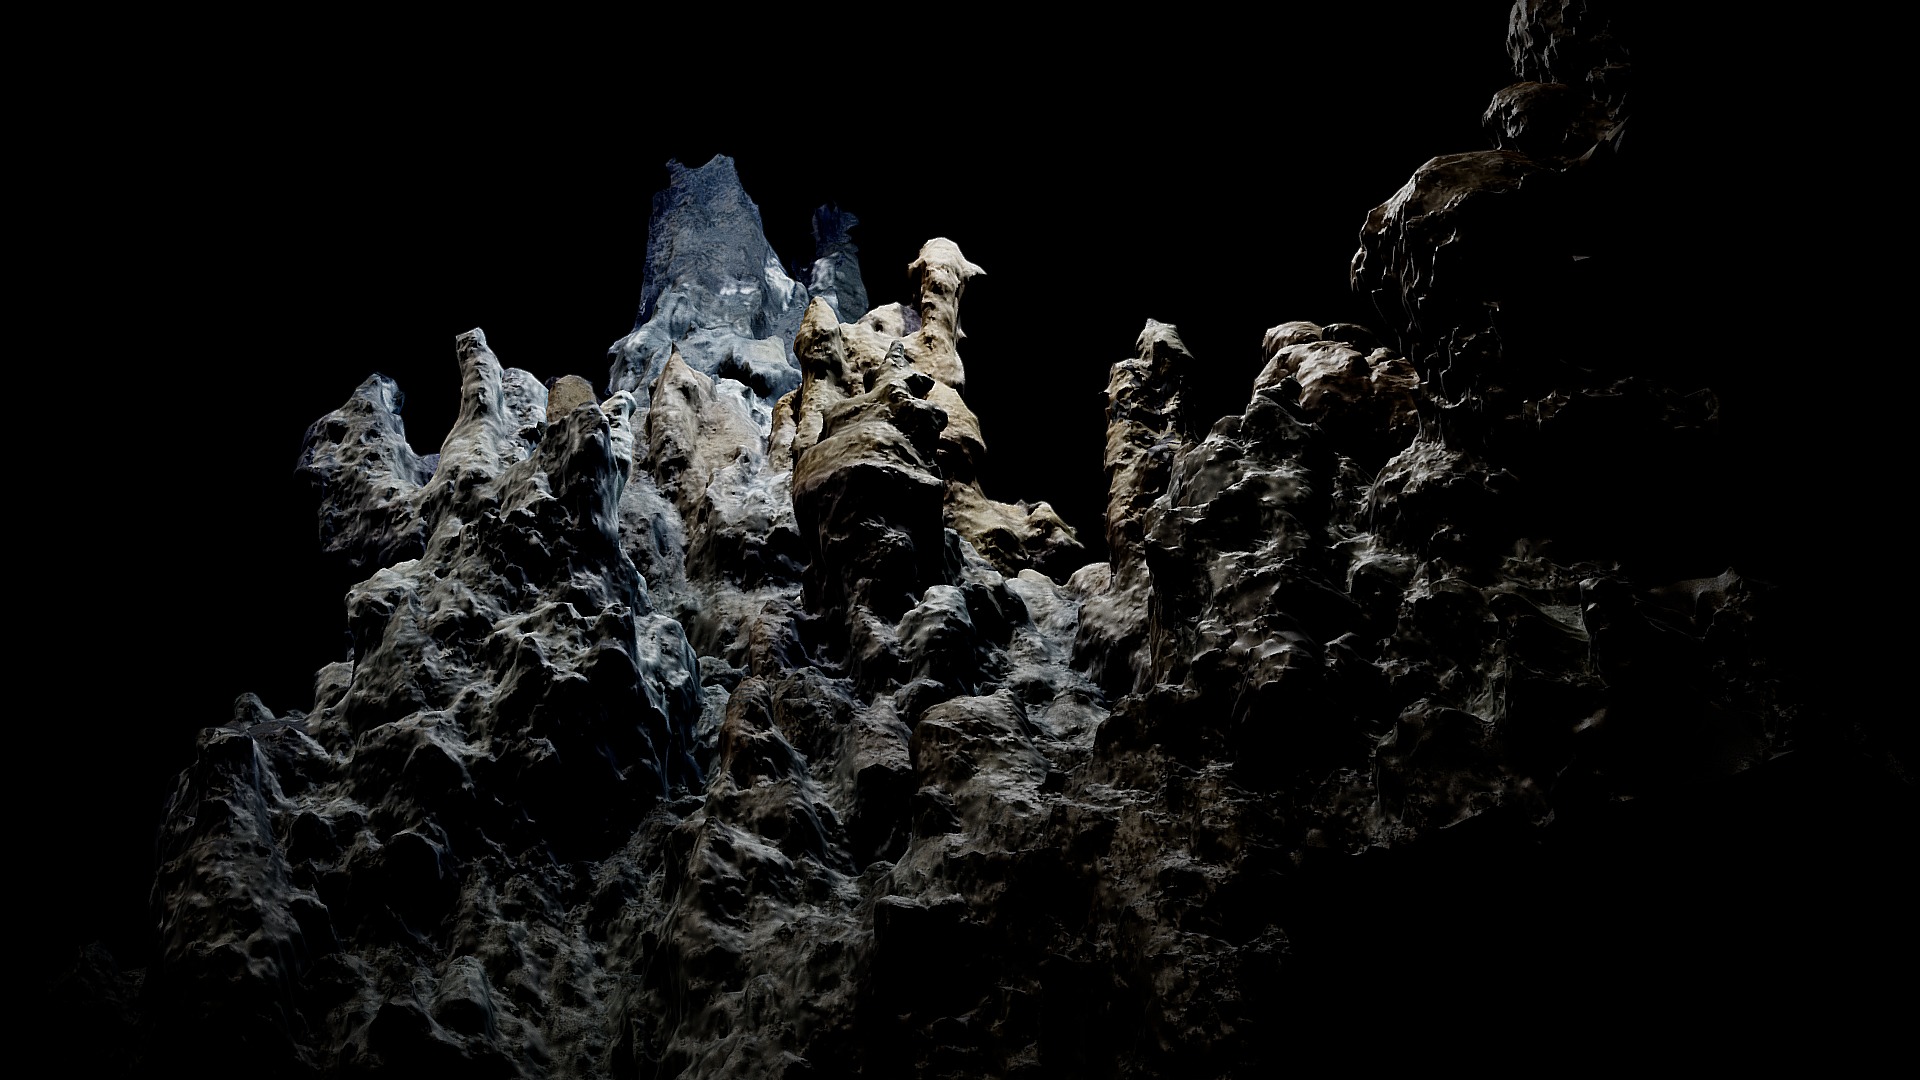 3D model Low Poly Deep Sea Hydrothermal Vent #10 - This is a 3D model of the Low Poly Deep Sea Hydrothermal Vent #10. The 3D model is about a group of people on a mountain.